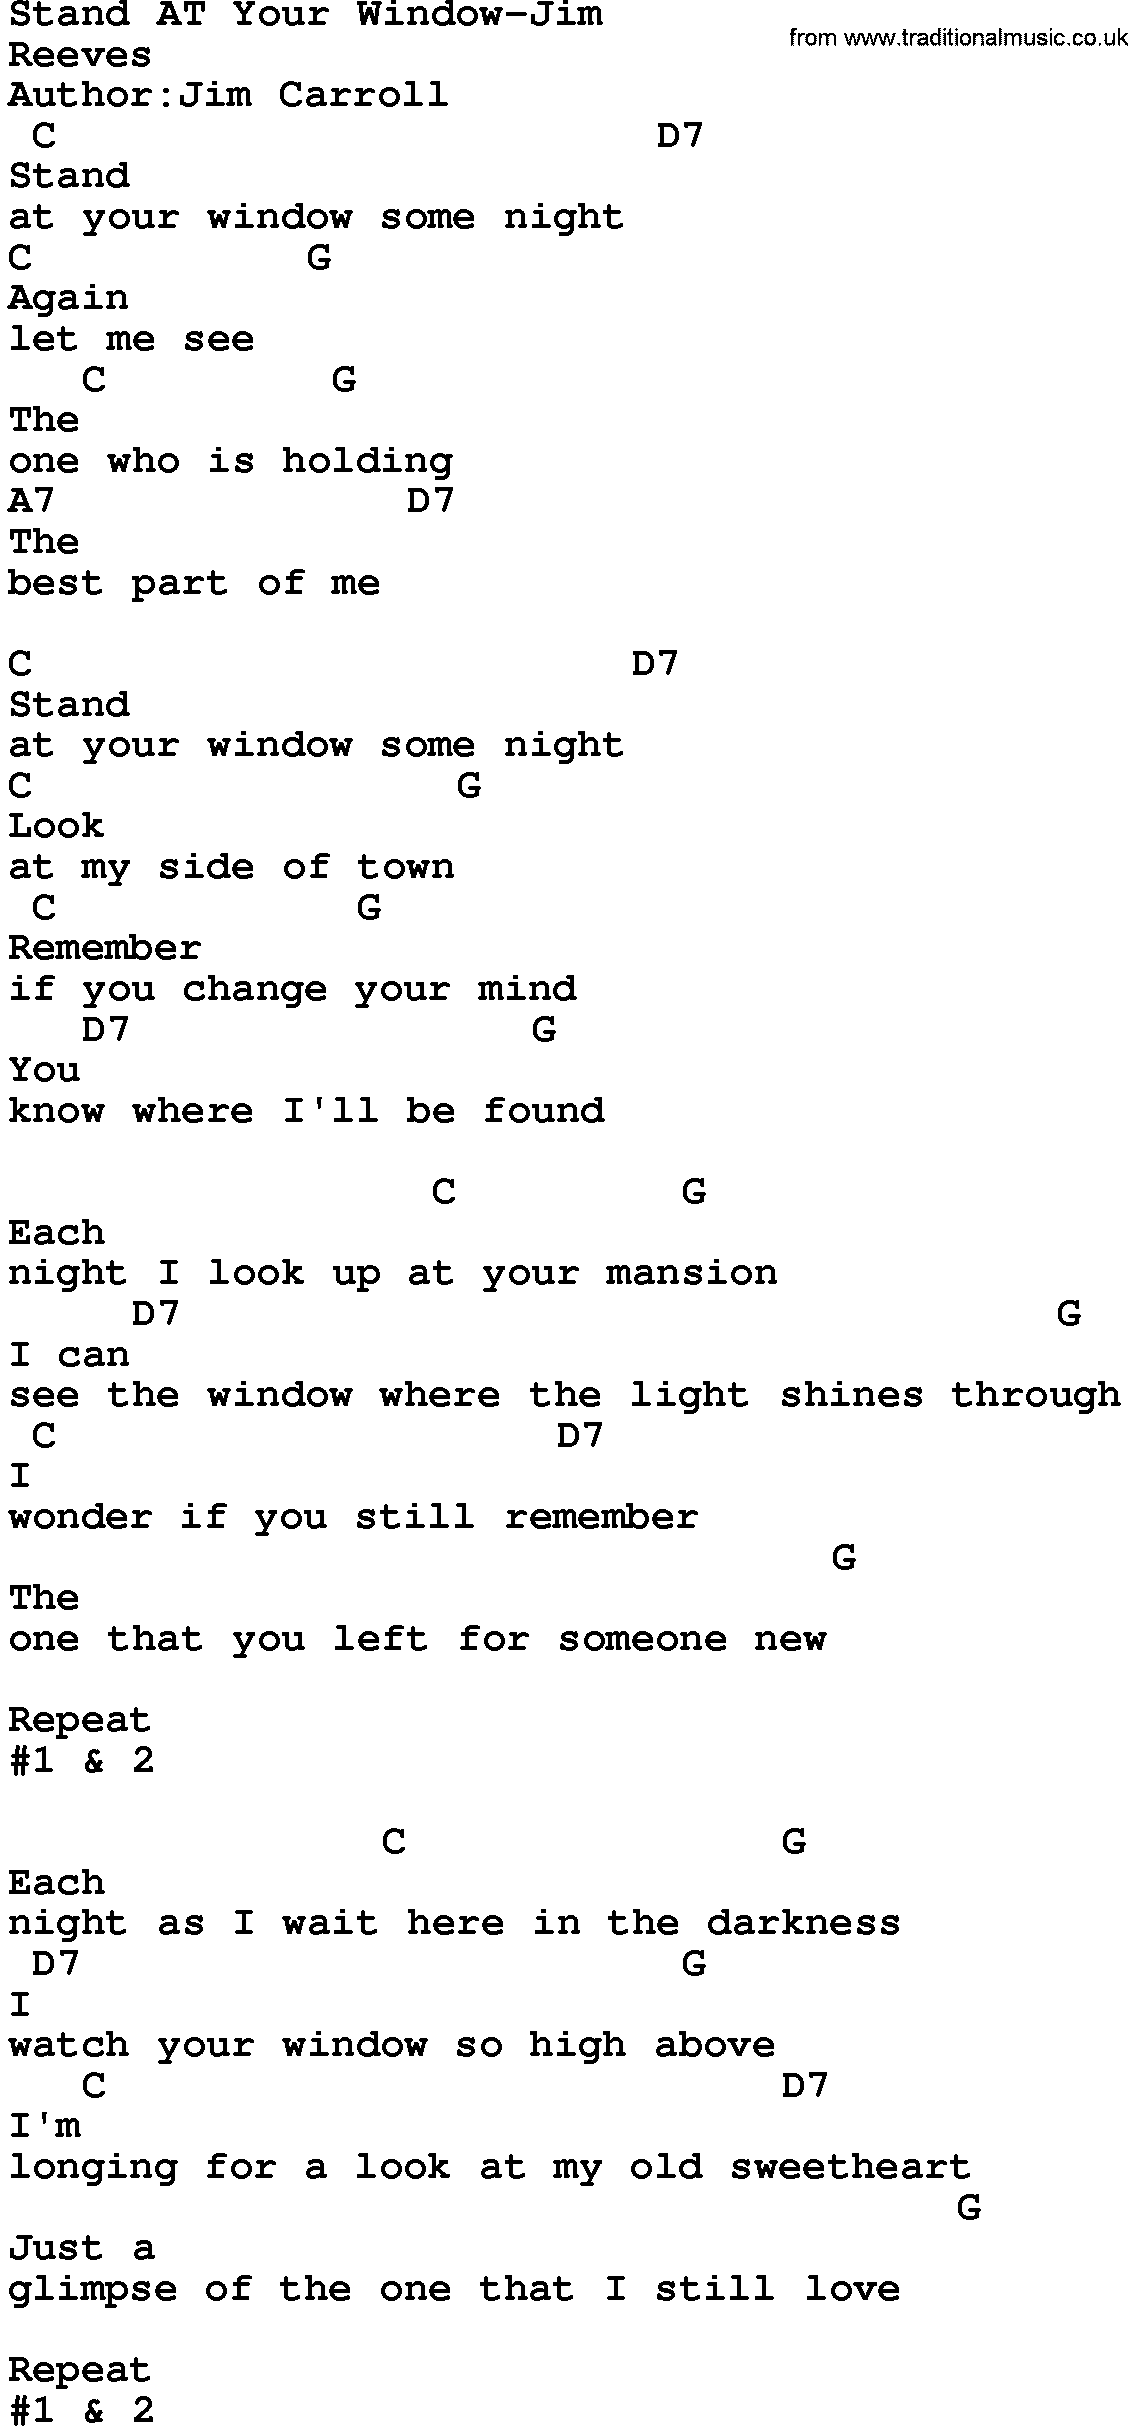 Country music song: Stand At Your Window-Jim lyrics and chords